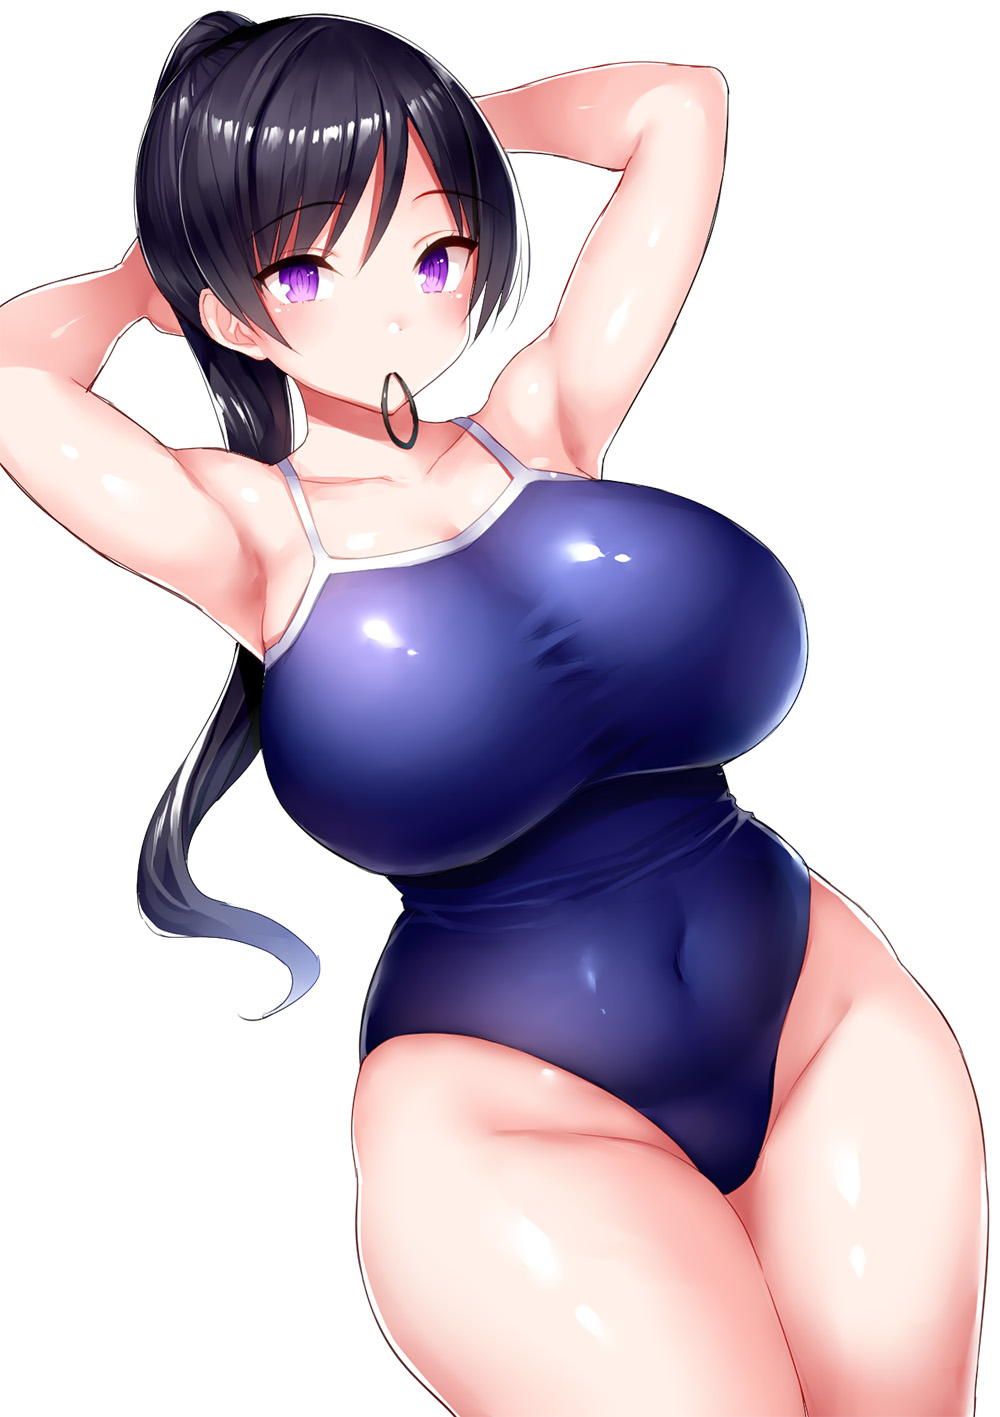 This is a two-dimensional erotic image of a girl wearing plump squirt water that says "This is no good..." 15